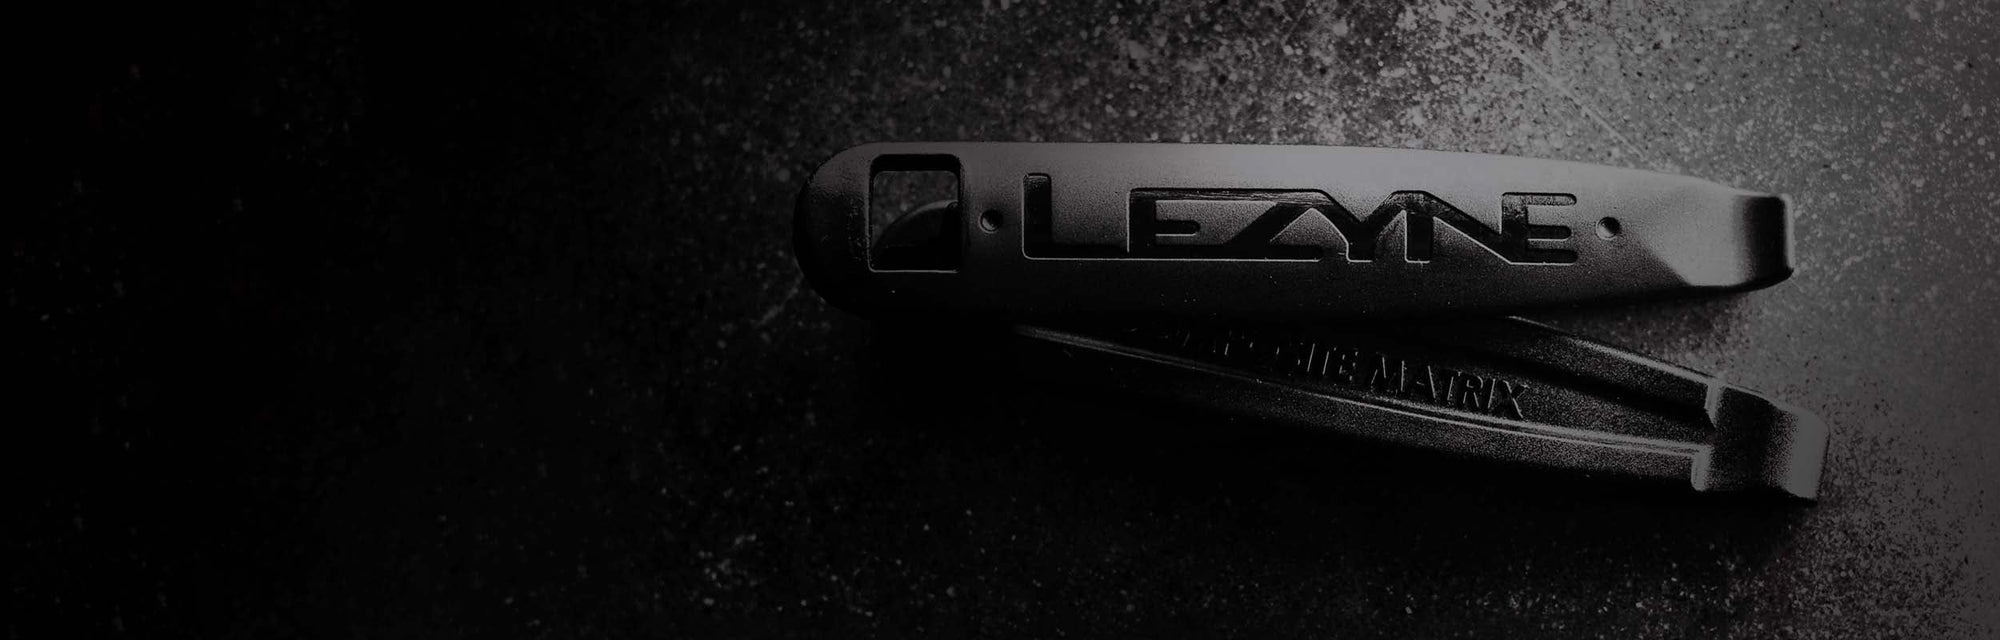 A close up of a tire lever with the word Lezyne printed on it.